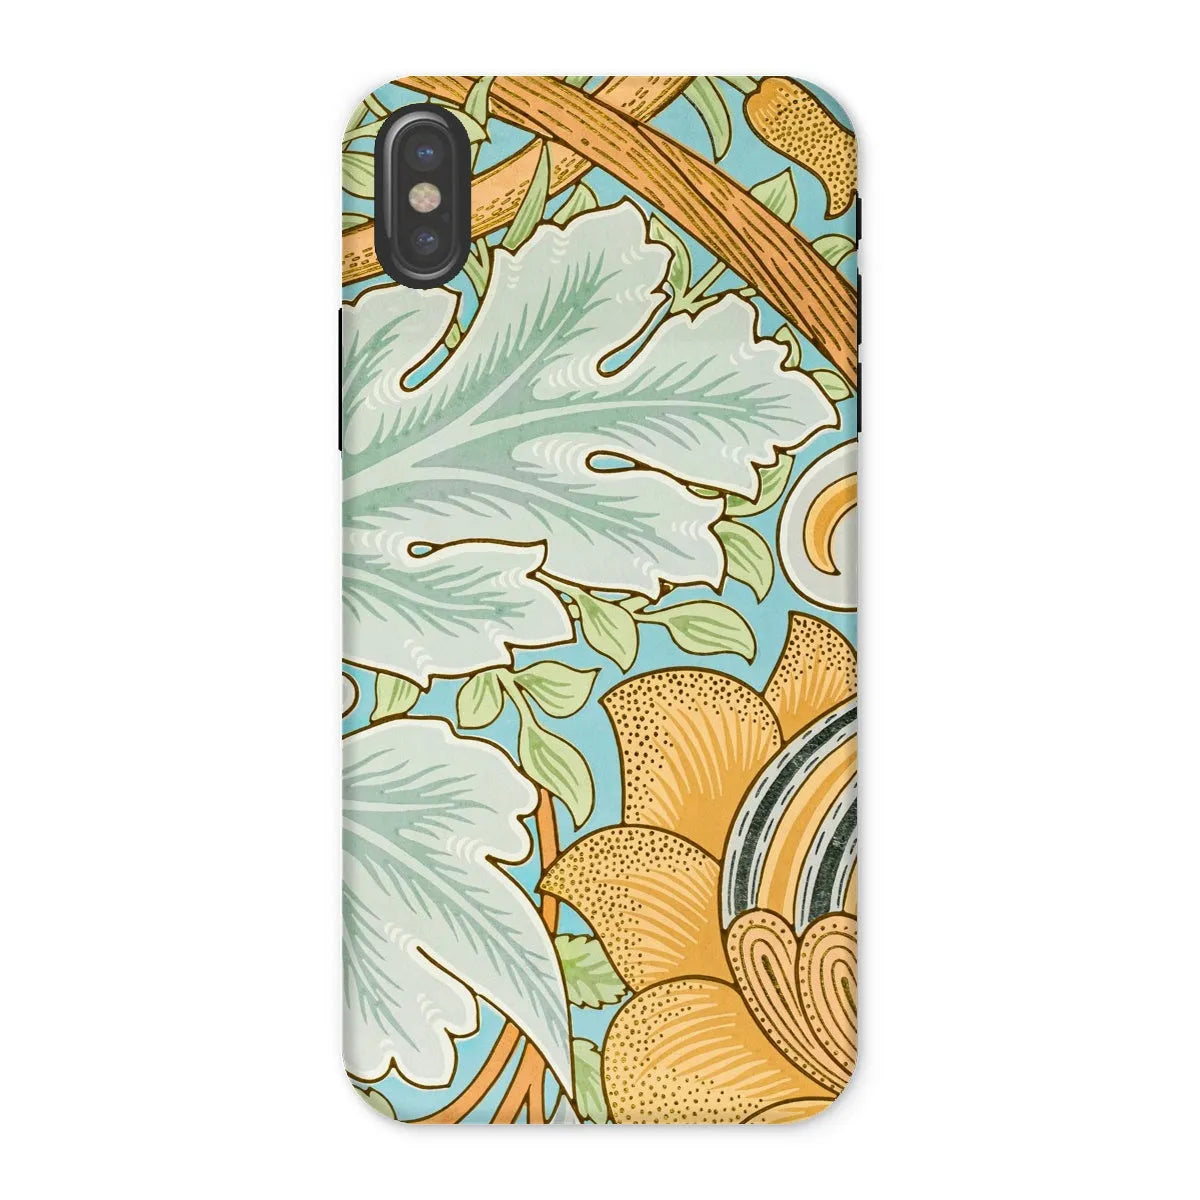 St. James - Arts And Crafts Phone Case - William Morris - Iphone x / Matte - Mobile Phone Cases - Aesthetic Art